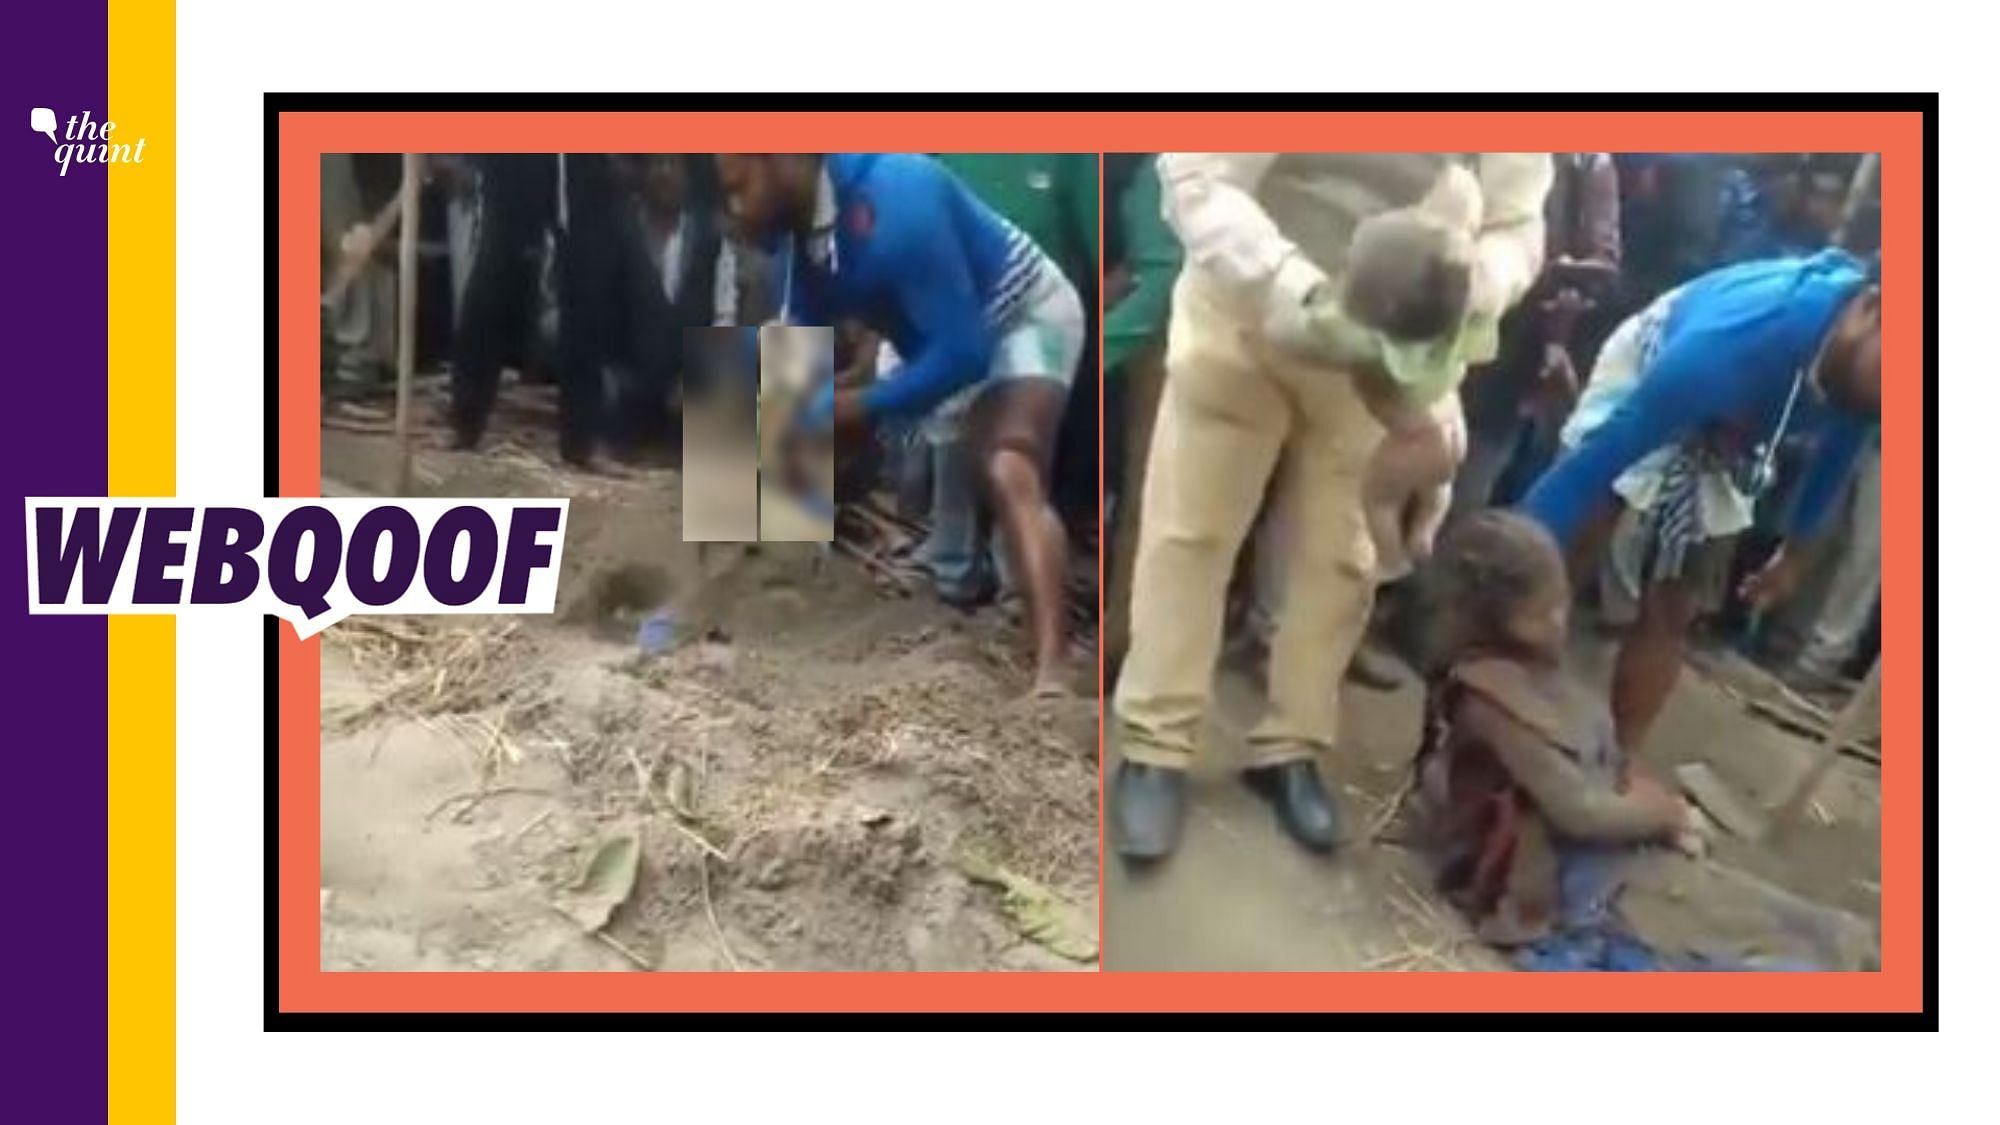 The video is being widely shared on social media with the claim that ‘Hindutva goons’ are burying muslims.&nbsp;